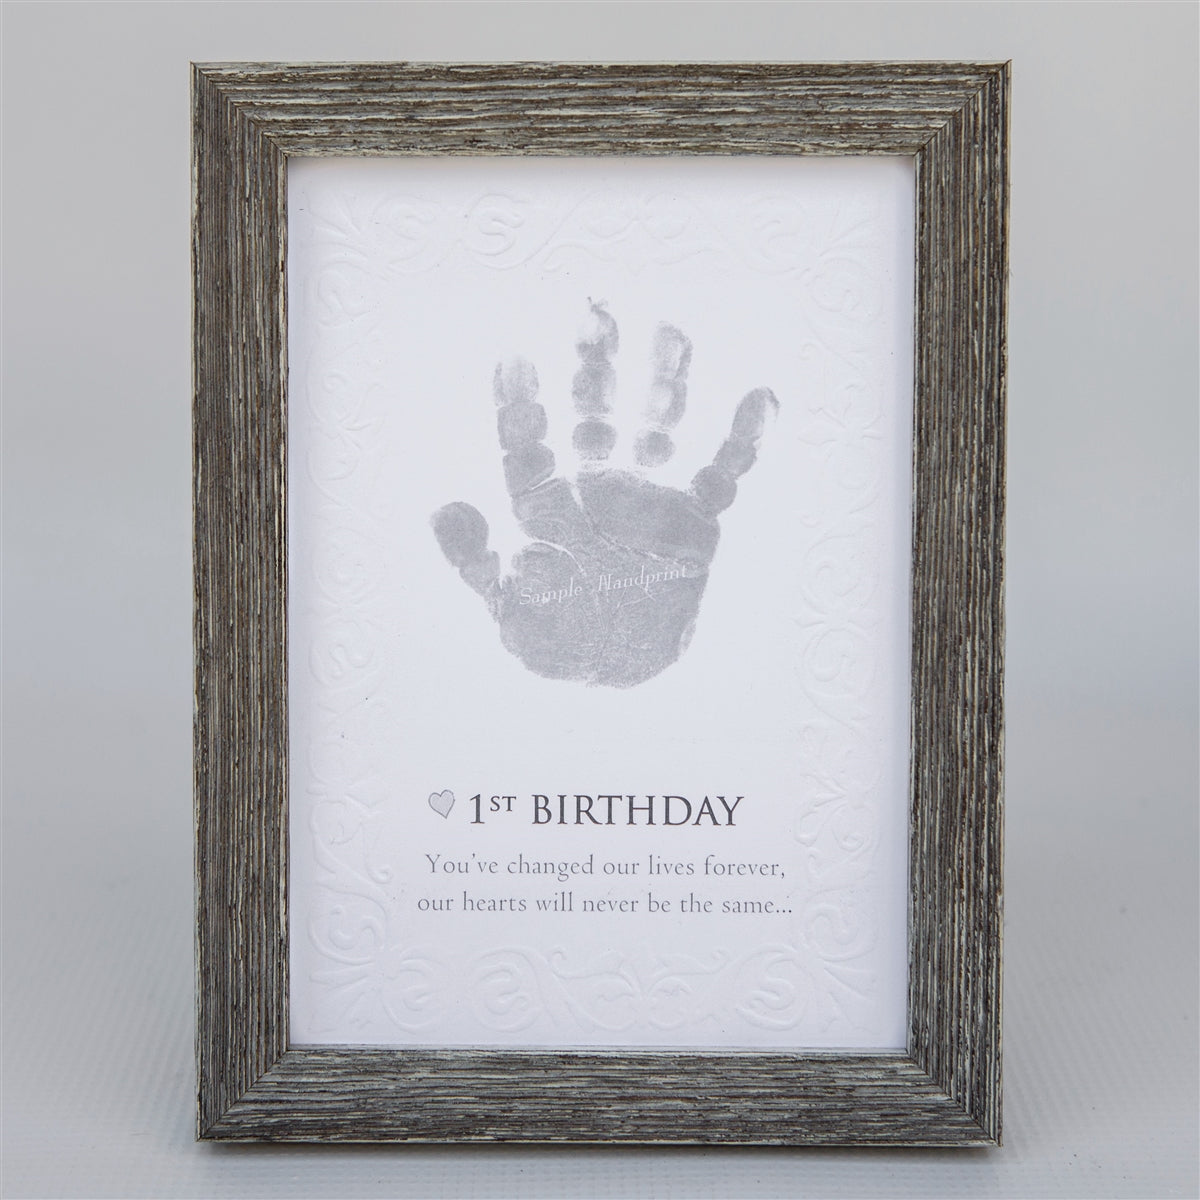 5x7 farmhouse frame with &quot;1st Birthday&quot; sentiment on embossed cardstock with space for a child&#39;s handprint.